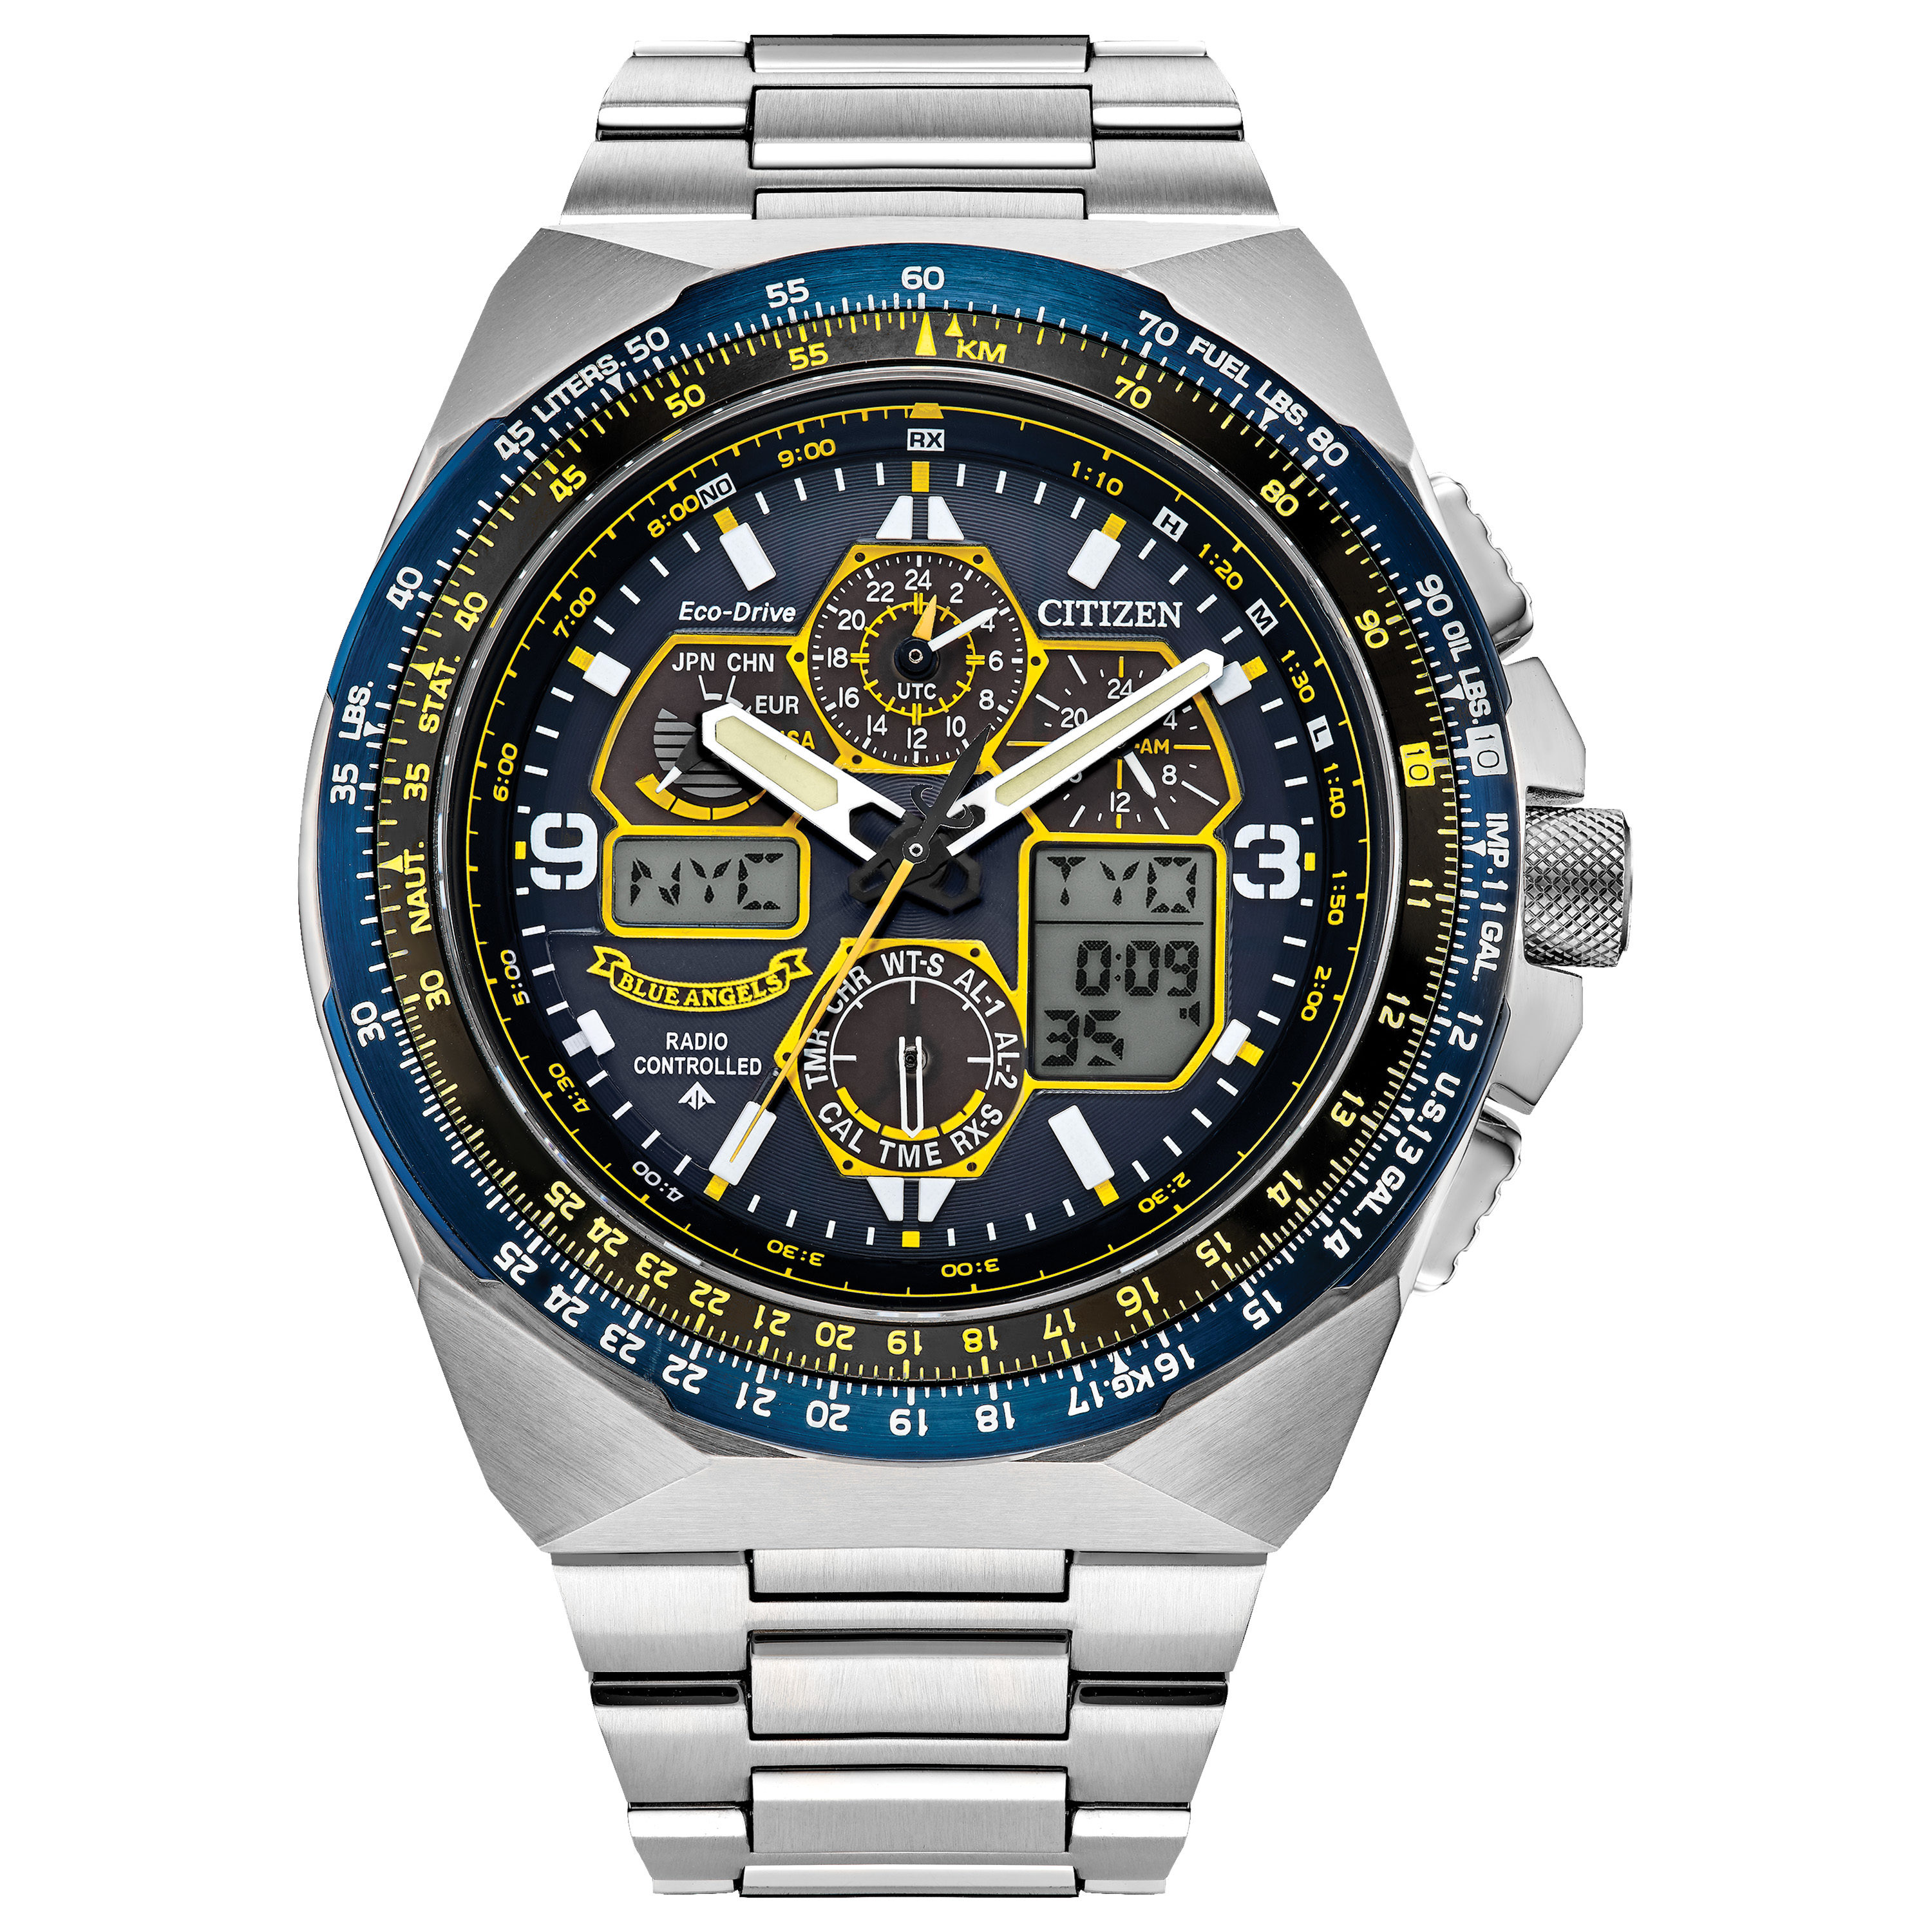 Sponsored: Introducing the Citizen Promaster Skyhawk A-T Blue Angels JY8128-56L